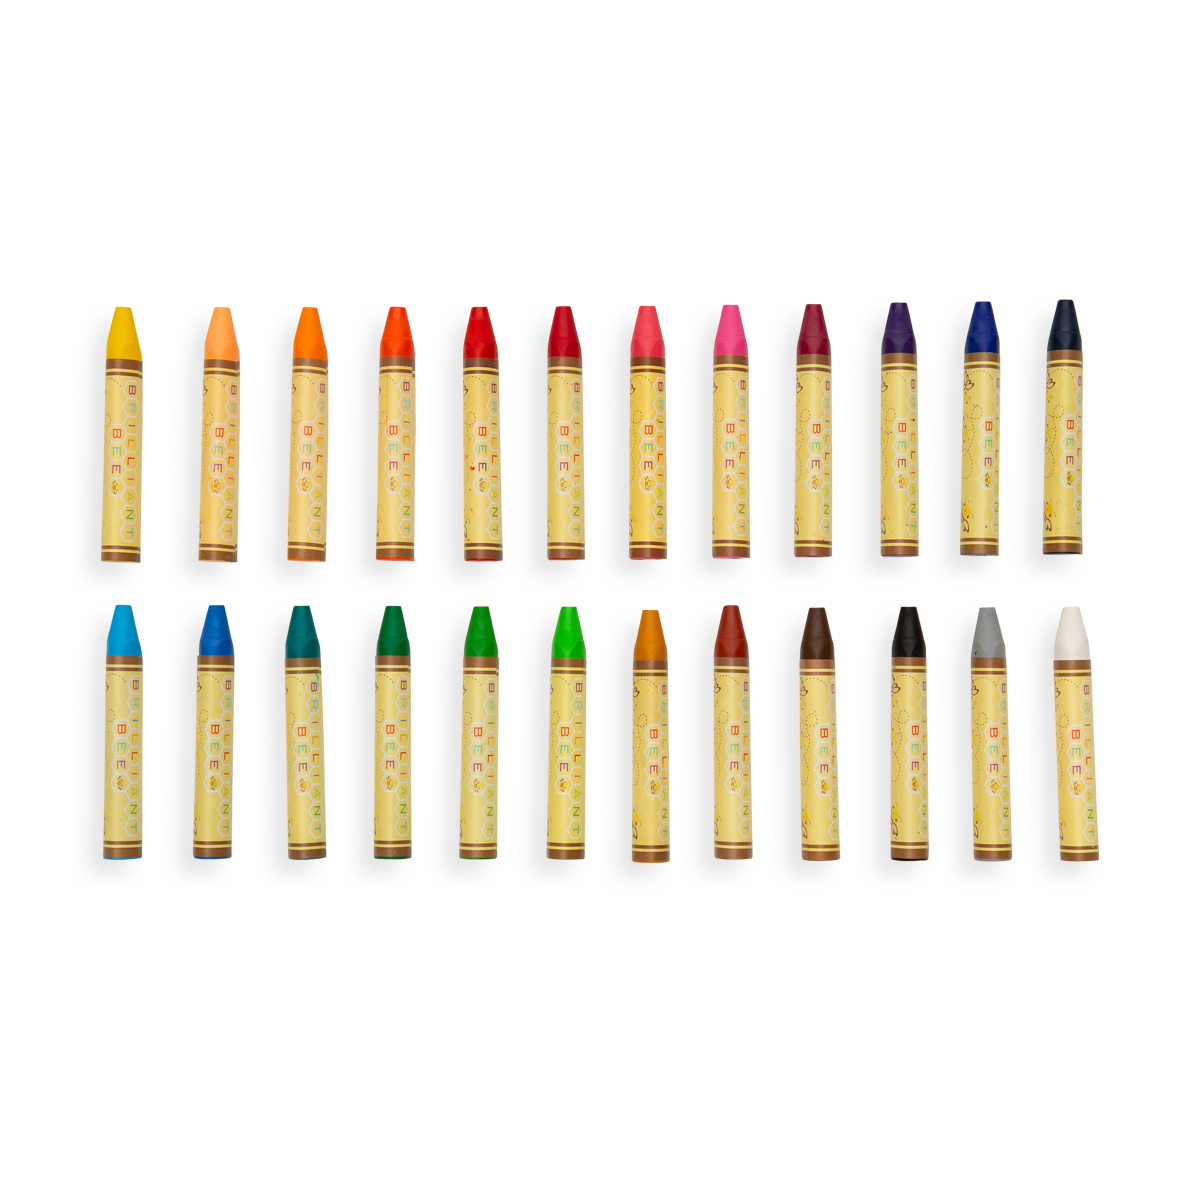 OOLY - Charm to Charm Stacking Crayons – Lindsay Kate Designs